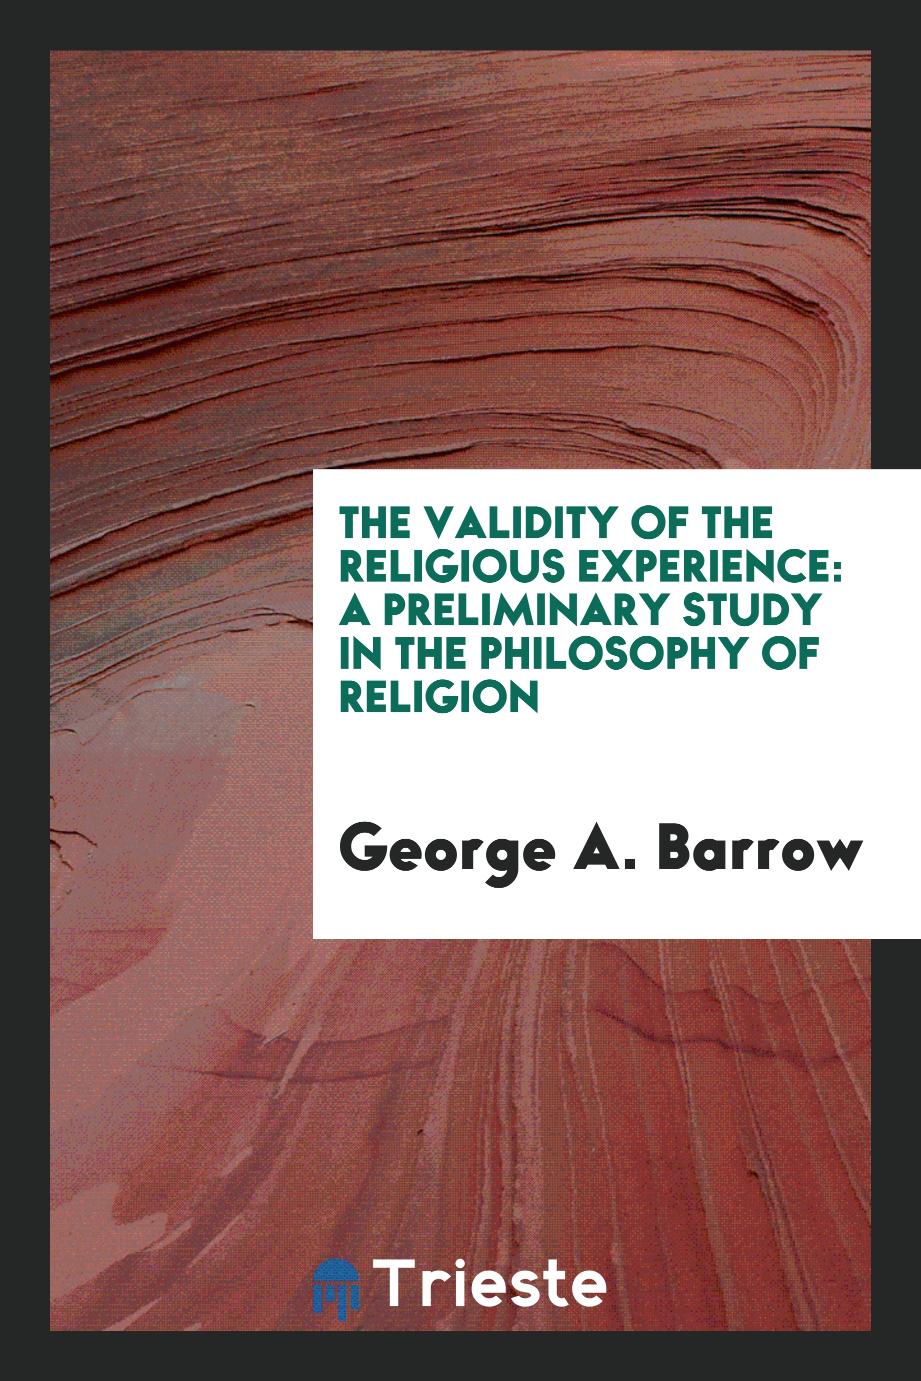 The validity of the religious experience: a preliminary study in the philosophy of religion